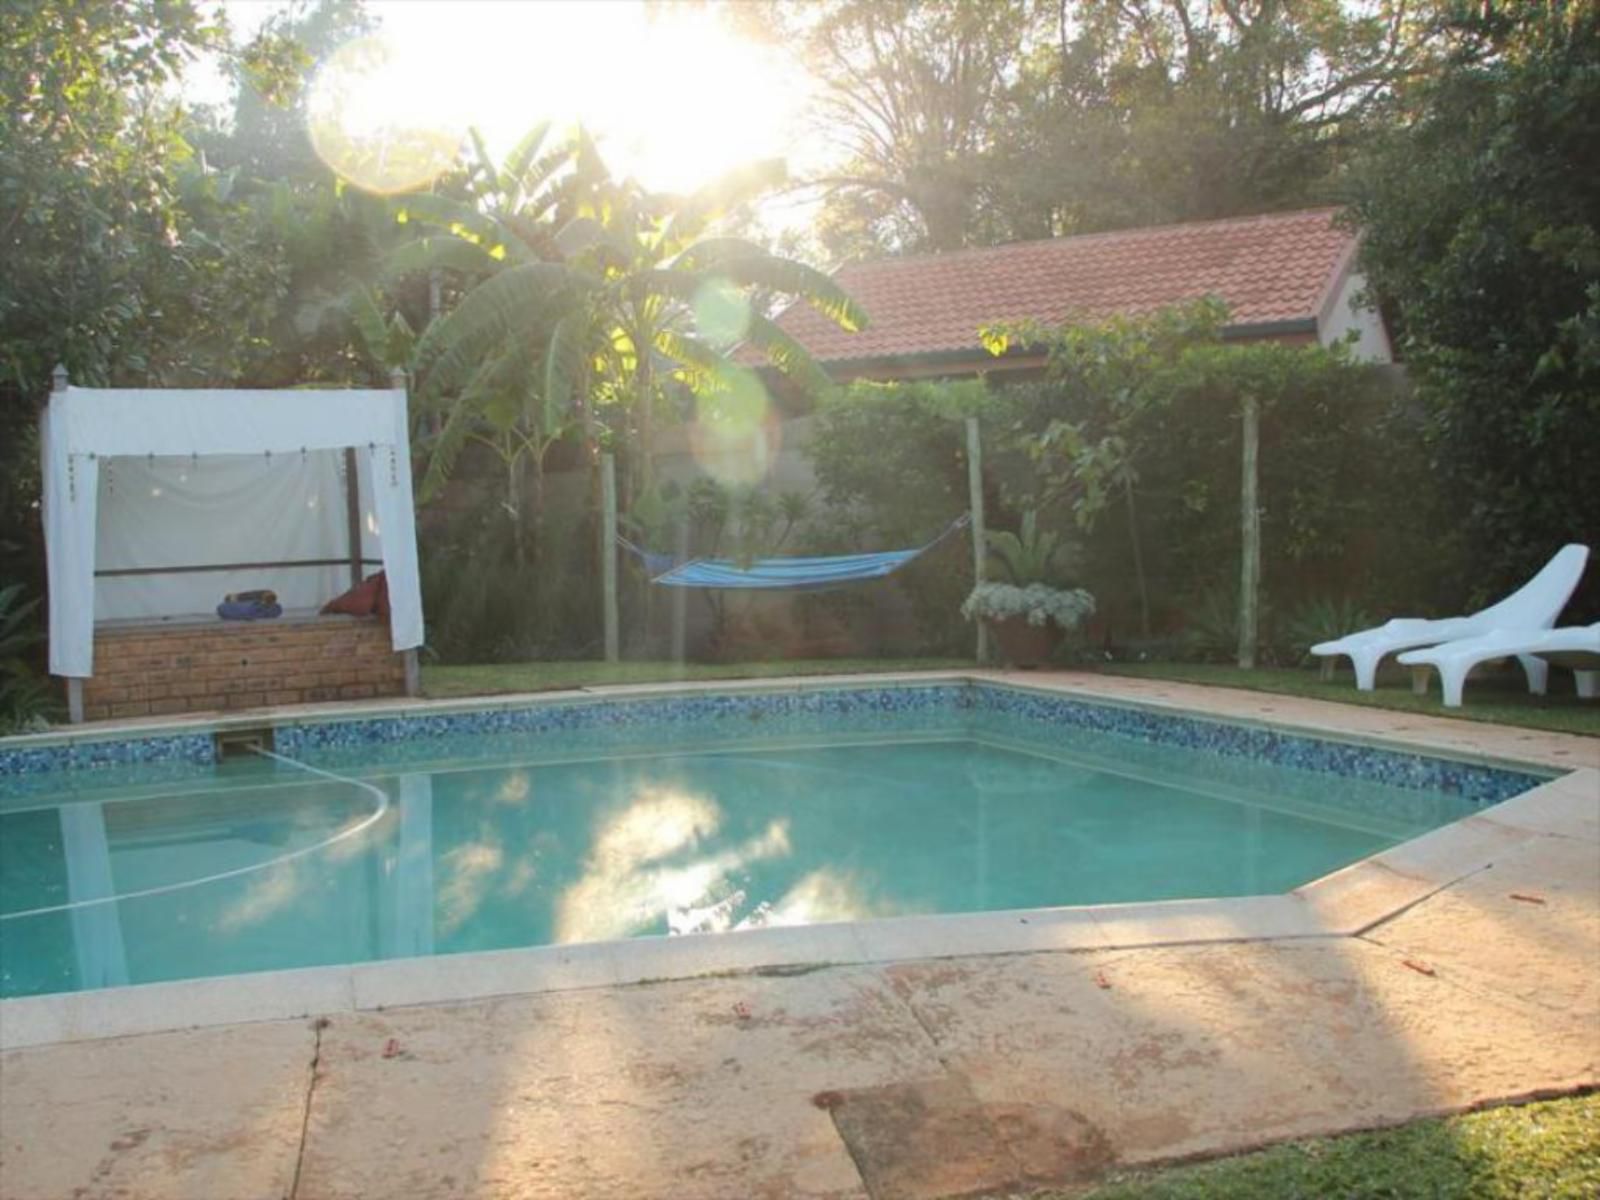 224 Carinus Bb And Self Catering Meyers Park Pretoria Tshwane Gauteng South Africa Palm Tree, Plant, Nature, Wood, Swimming Pool